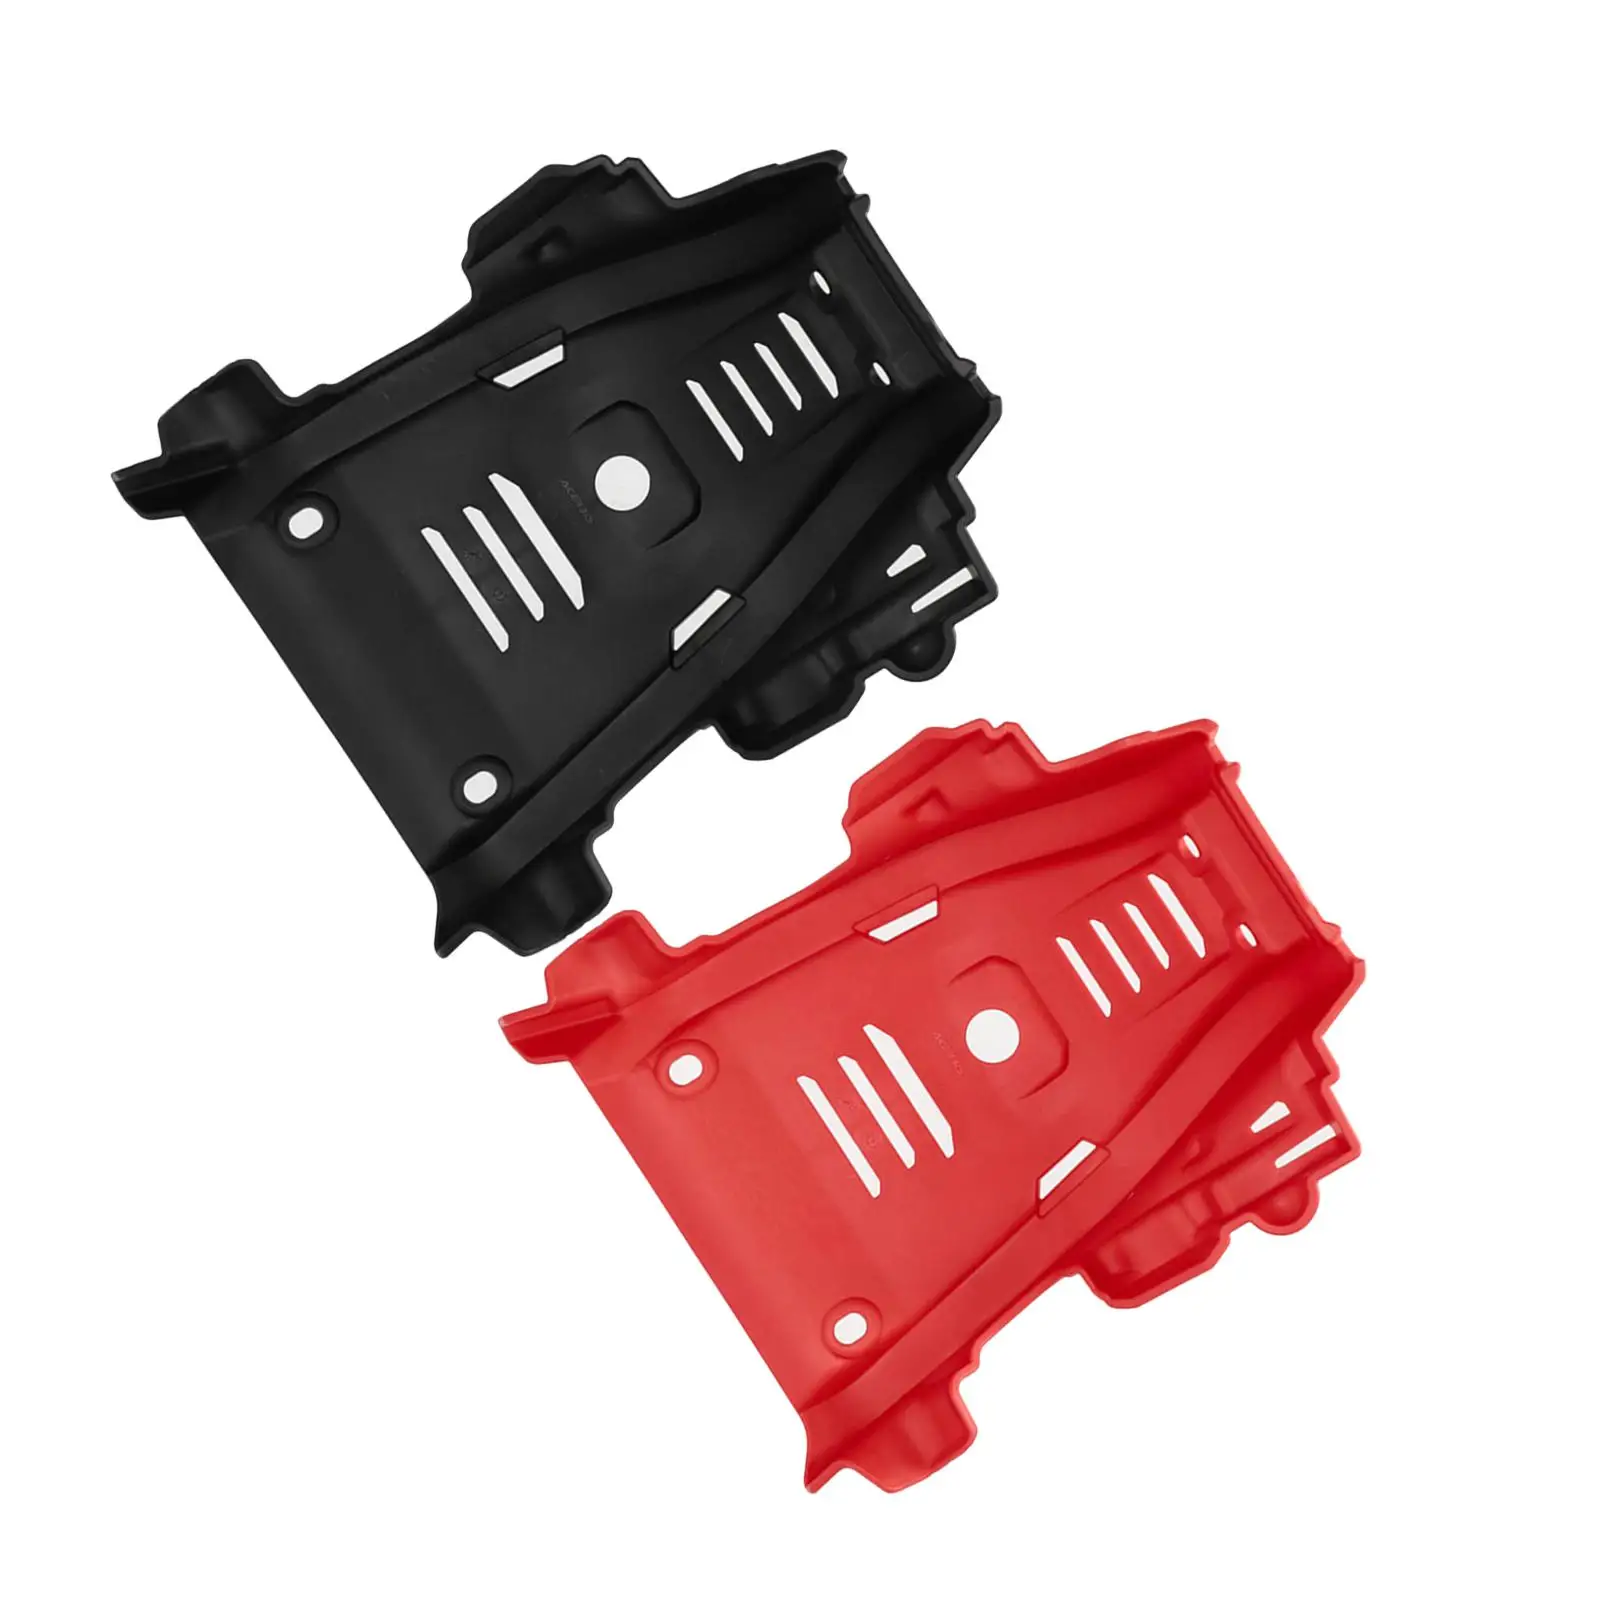 Motorcycle Engine Base Chassis Guard Plate Protective Cover for Crf300L Motorbike Motorcycle Premium Spare Parts